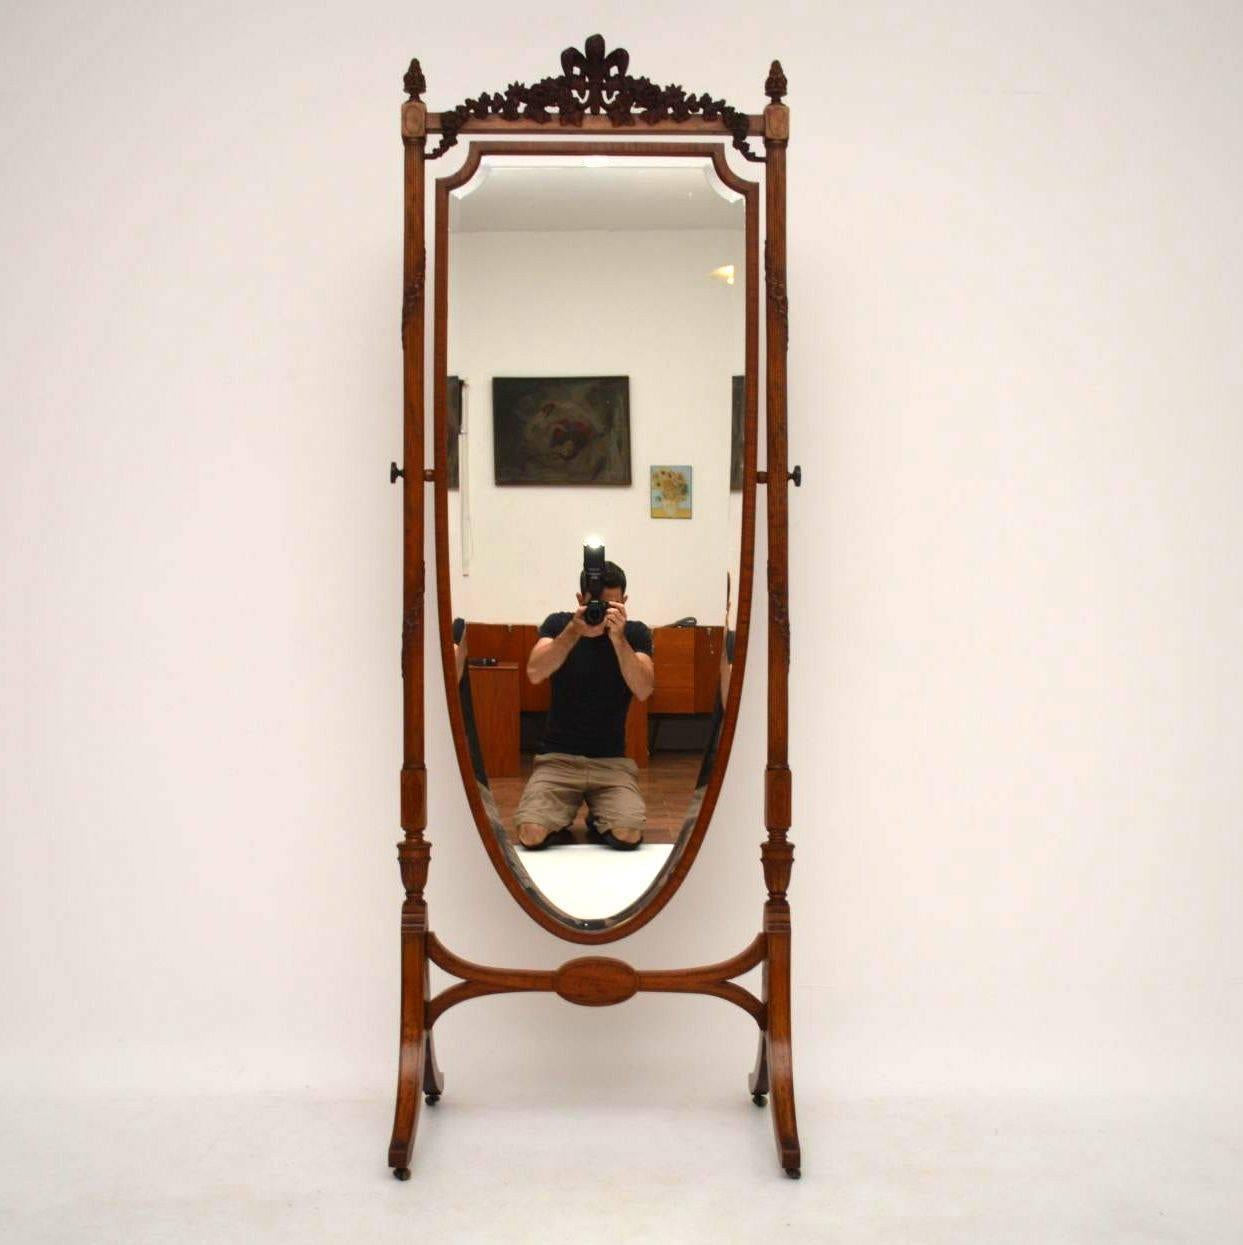 Very rare and impressive large antique satinwood full length cheval mirror that dates from around the 1890-1910 period. This cheval mirror has to be the nicest example I've ever seen. I don't think you will find many of these in satinwood on the